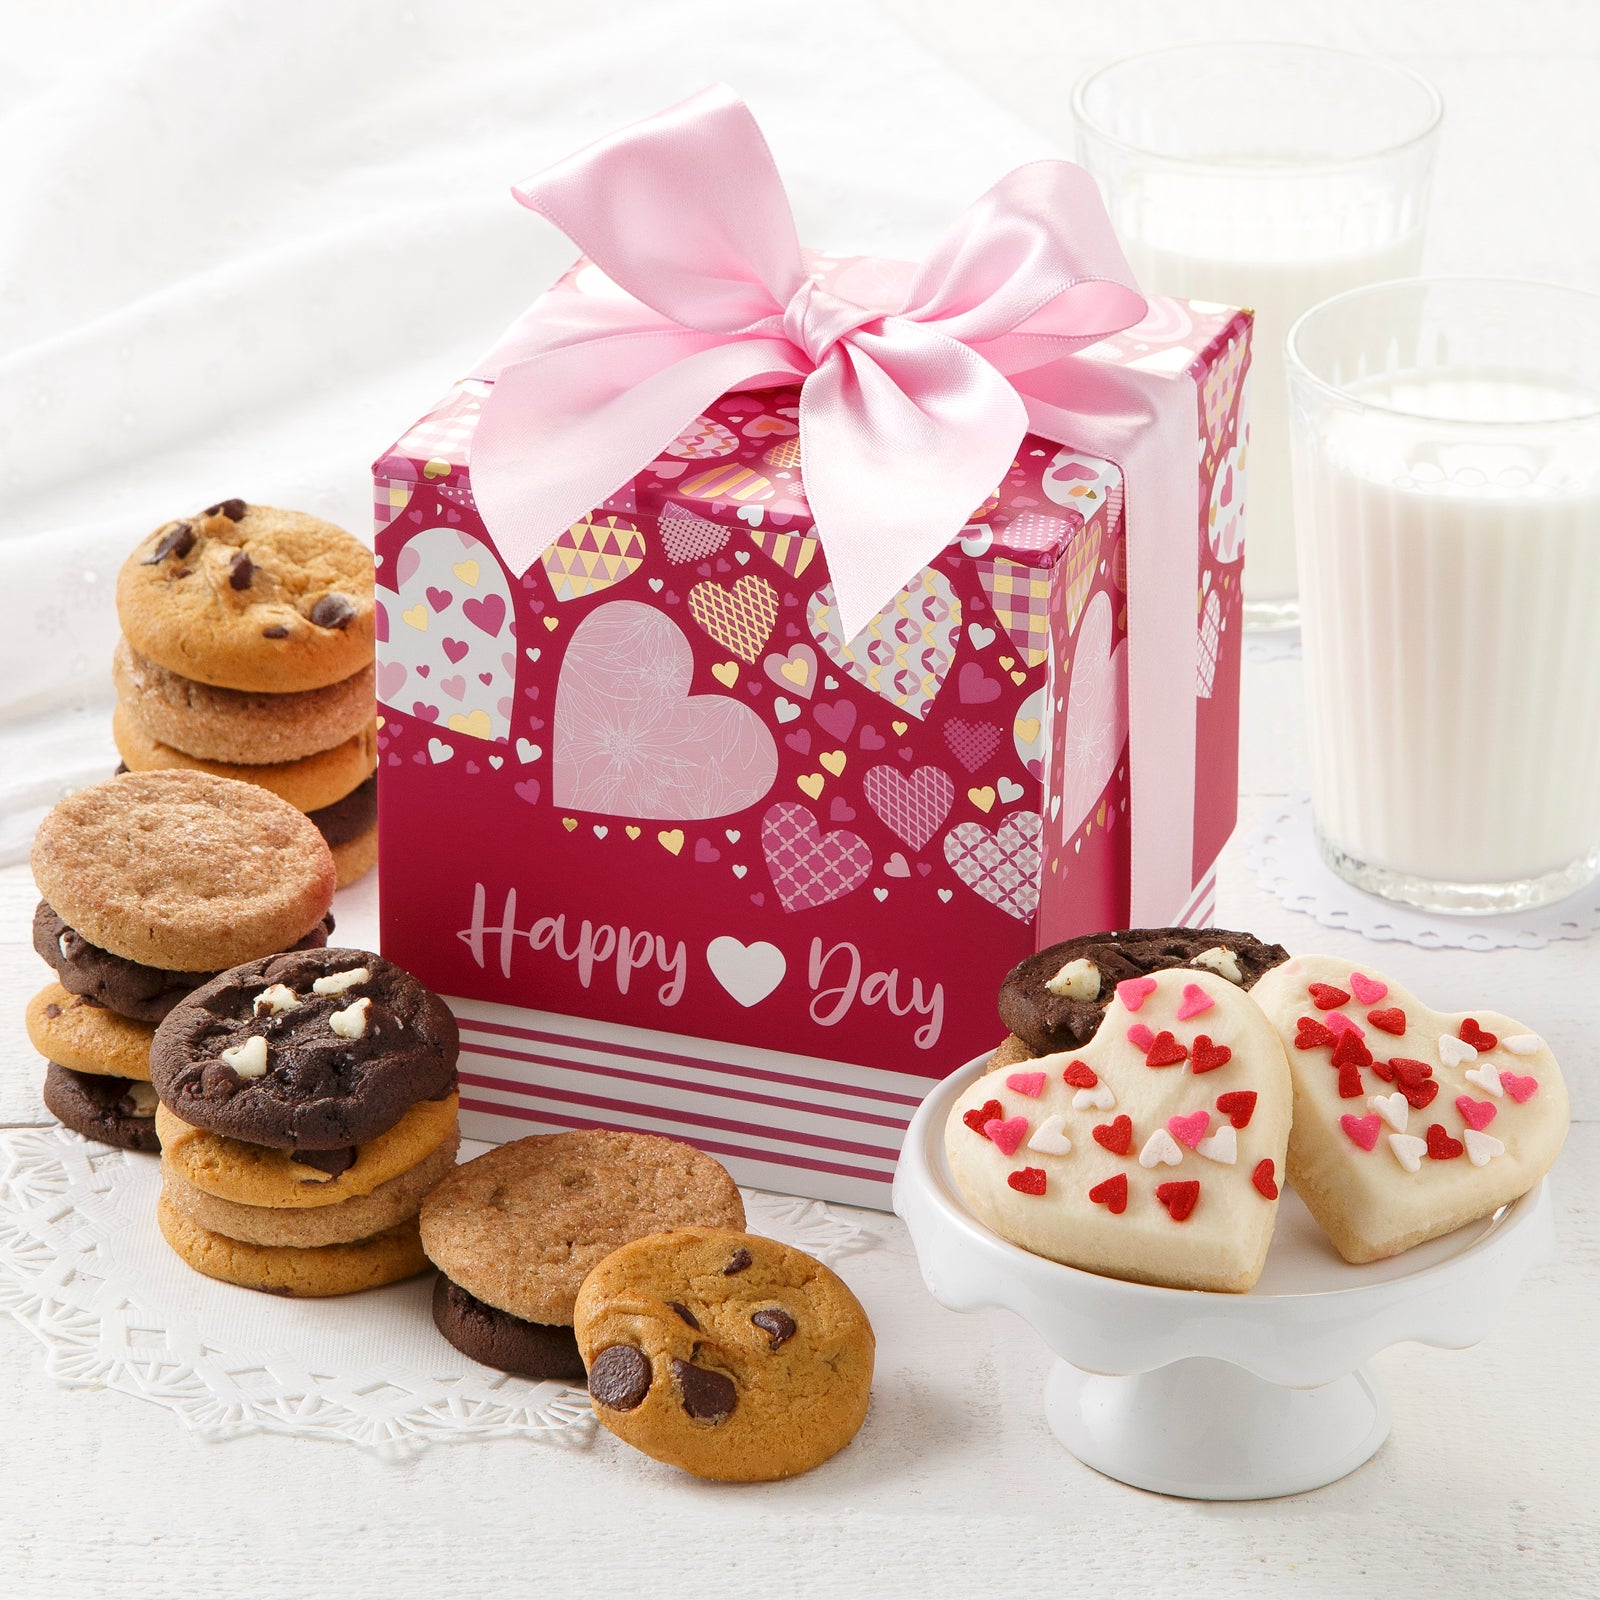 A mini Happy Valentine's Day gift box decorated with different size hearts and surrounded by an assortment of Nibblers and two mini frosted heart cookies with sprinkles